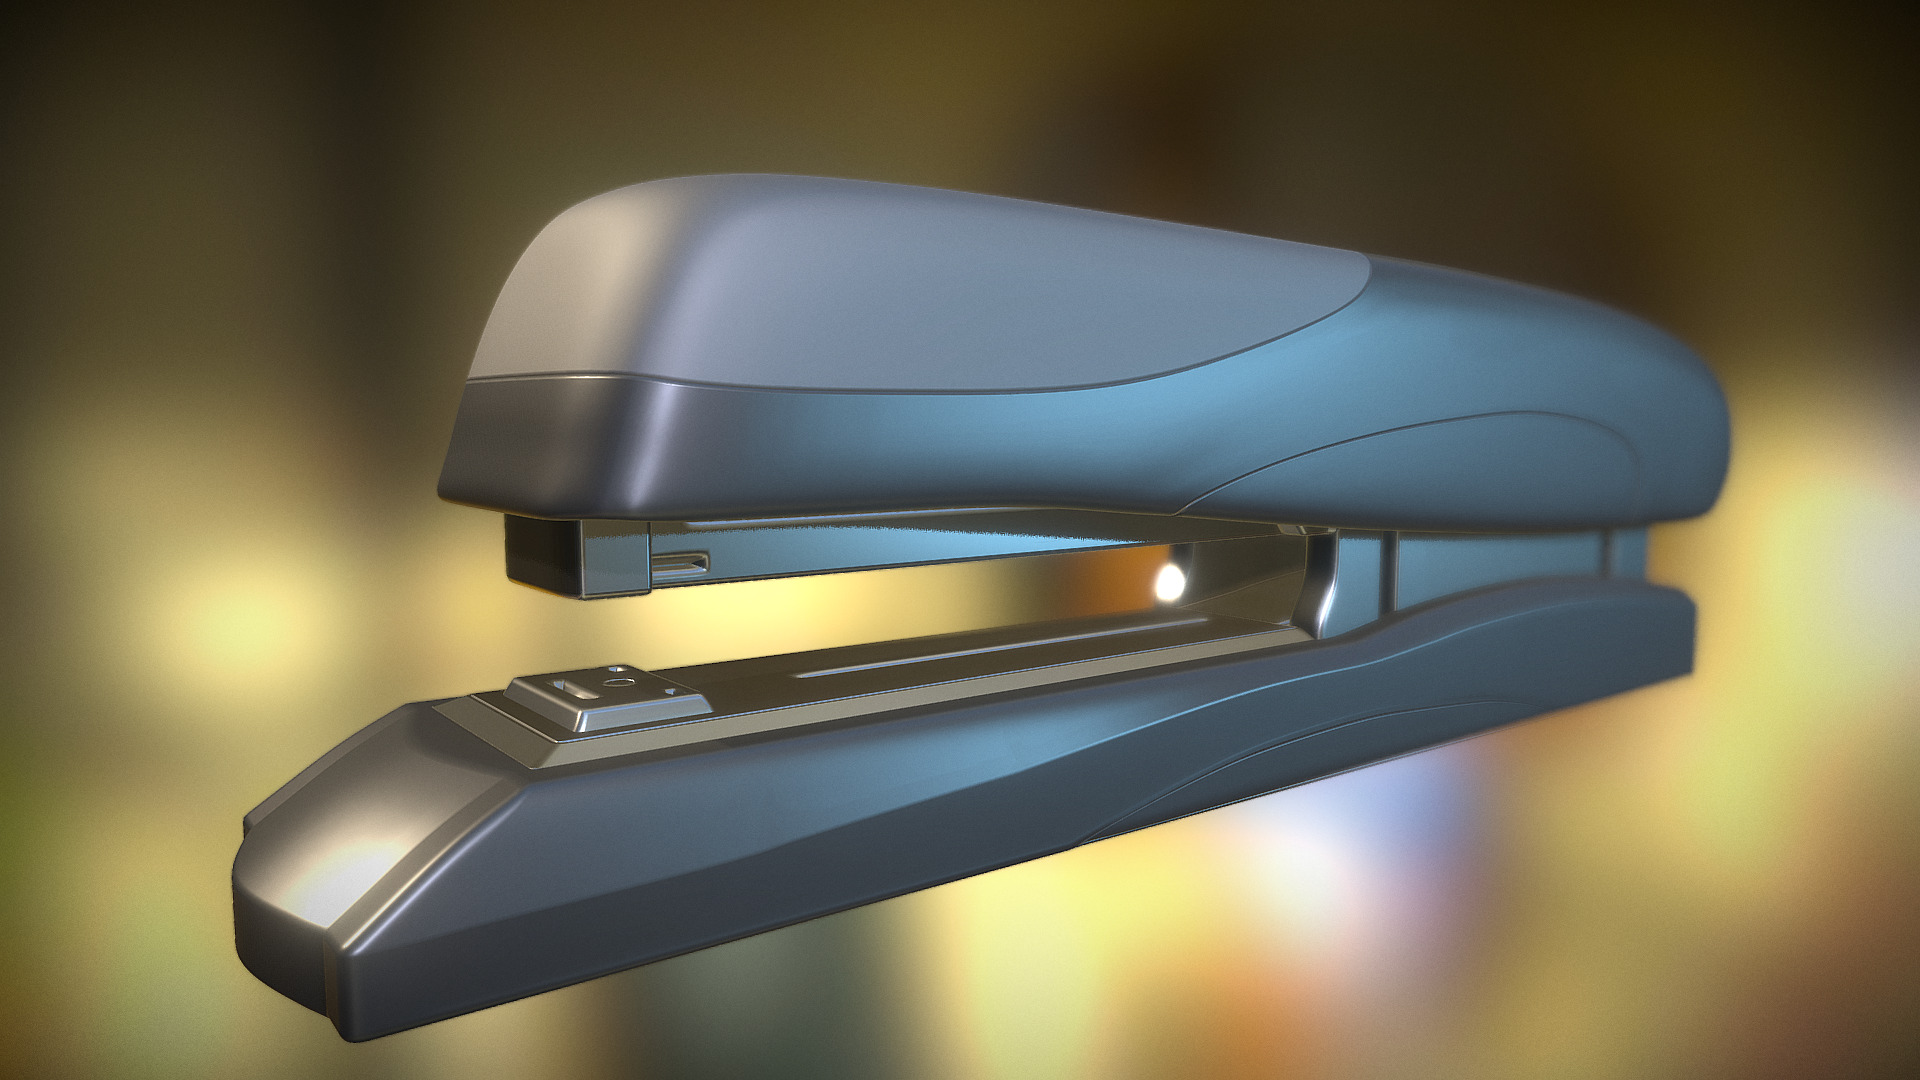 3D model Stapler High Poly Version - This is a 3D model of the Stapler High Poly Version. The 3D model is about a close-up of a computer mouse.